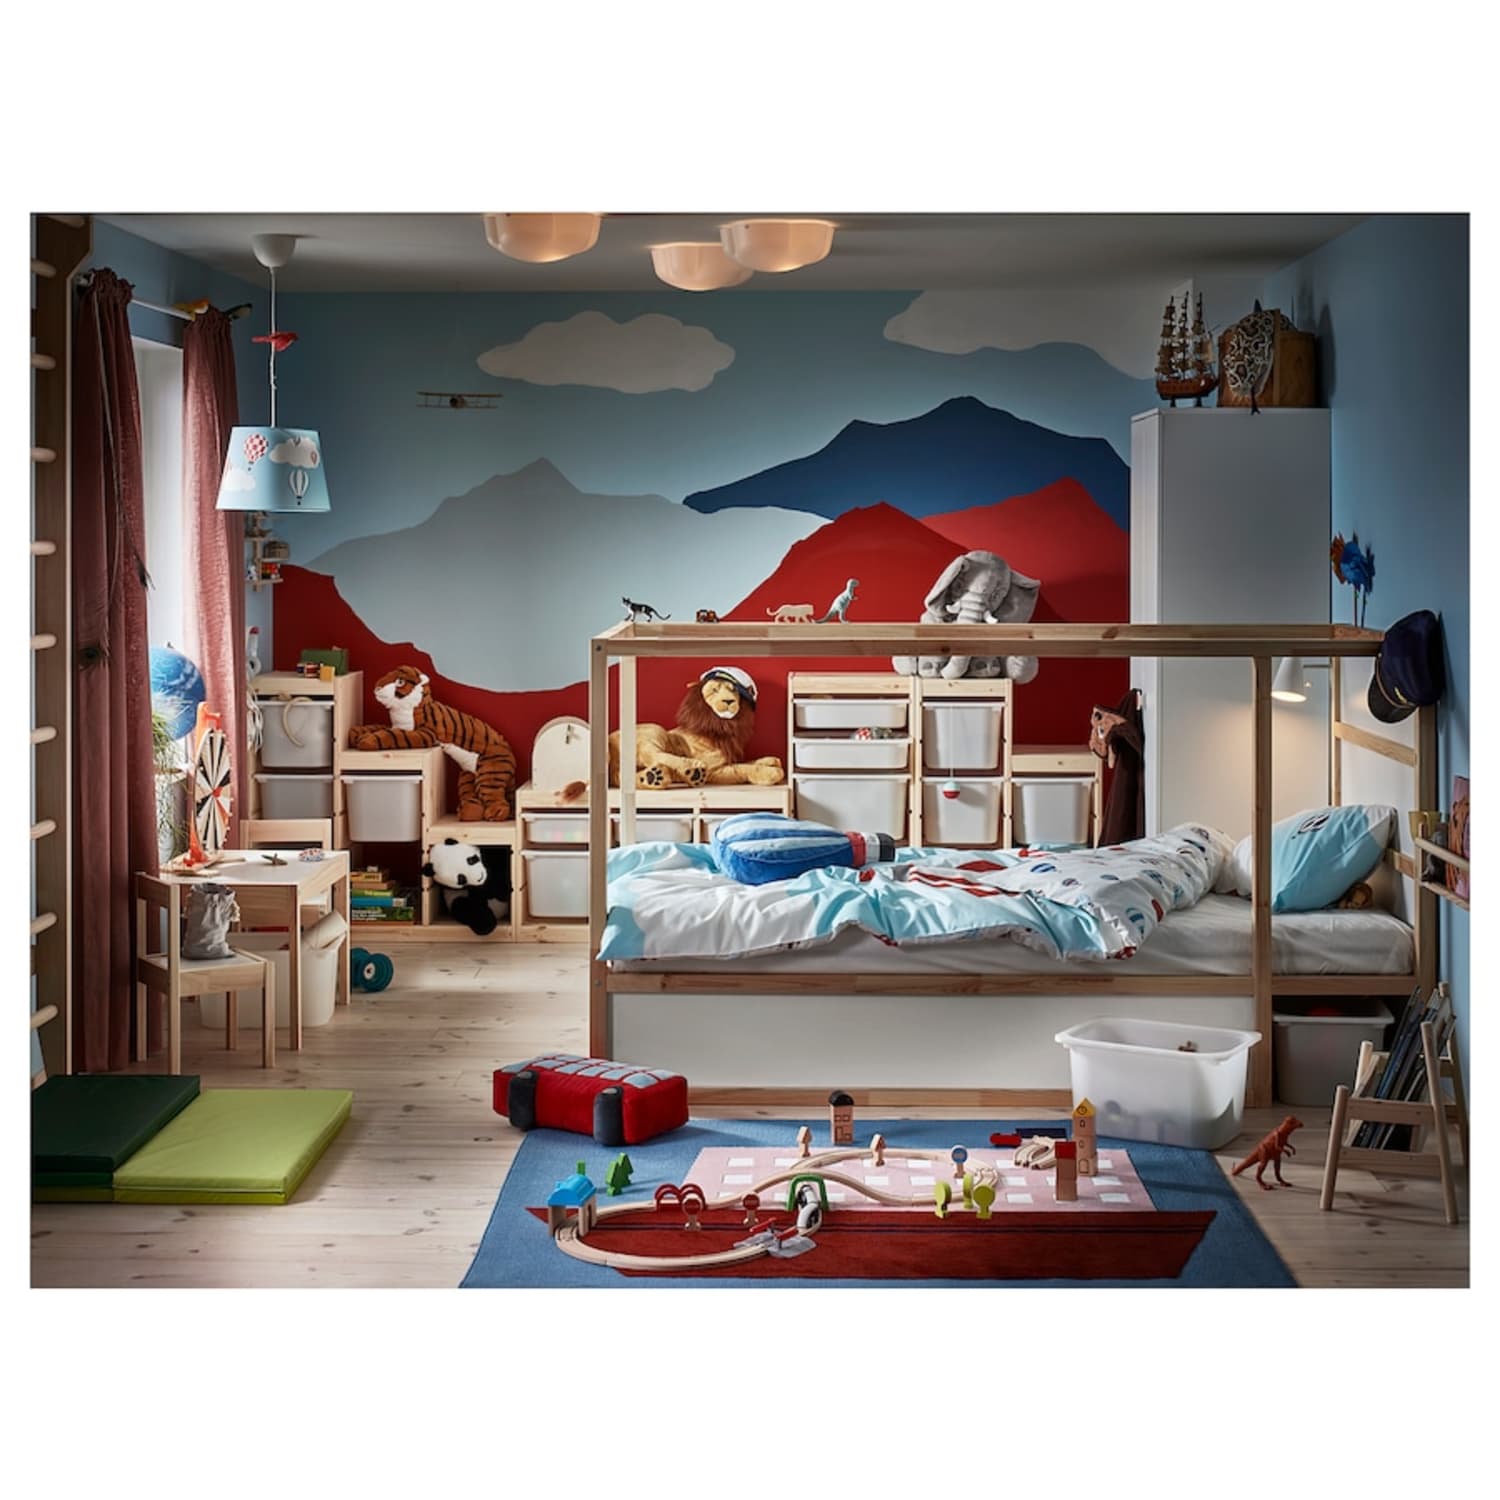 Discipline sirene D.w.z The IKEA KURA Bed Is the Perfect Toddler Loft Bed | Cubby